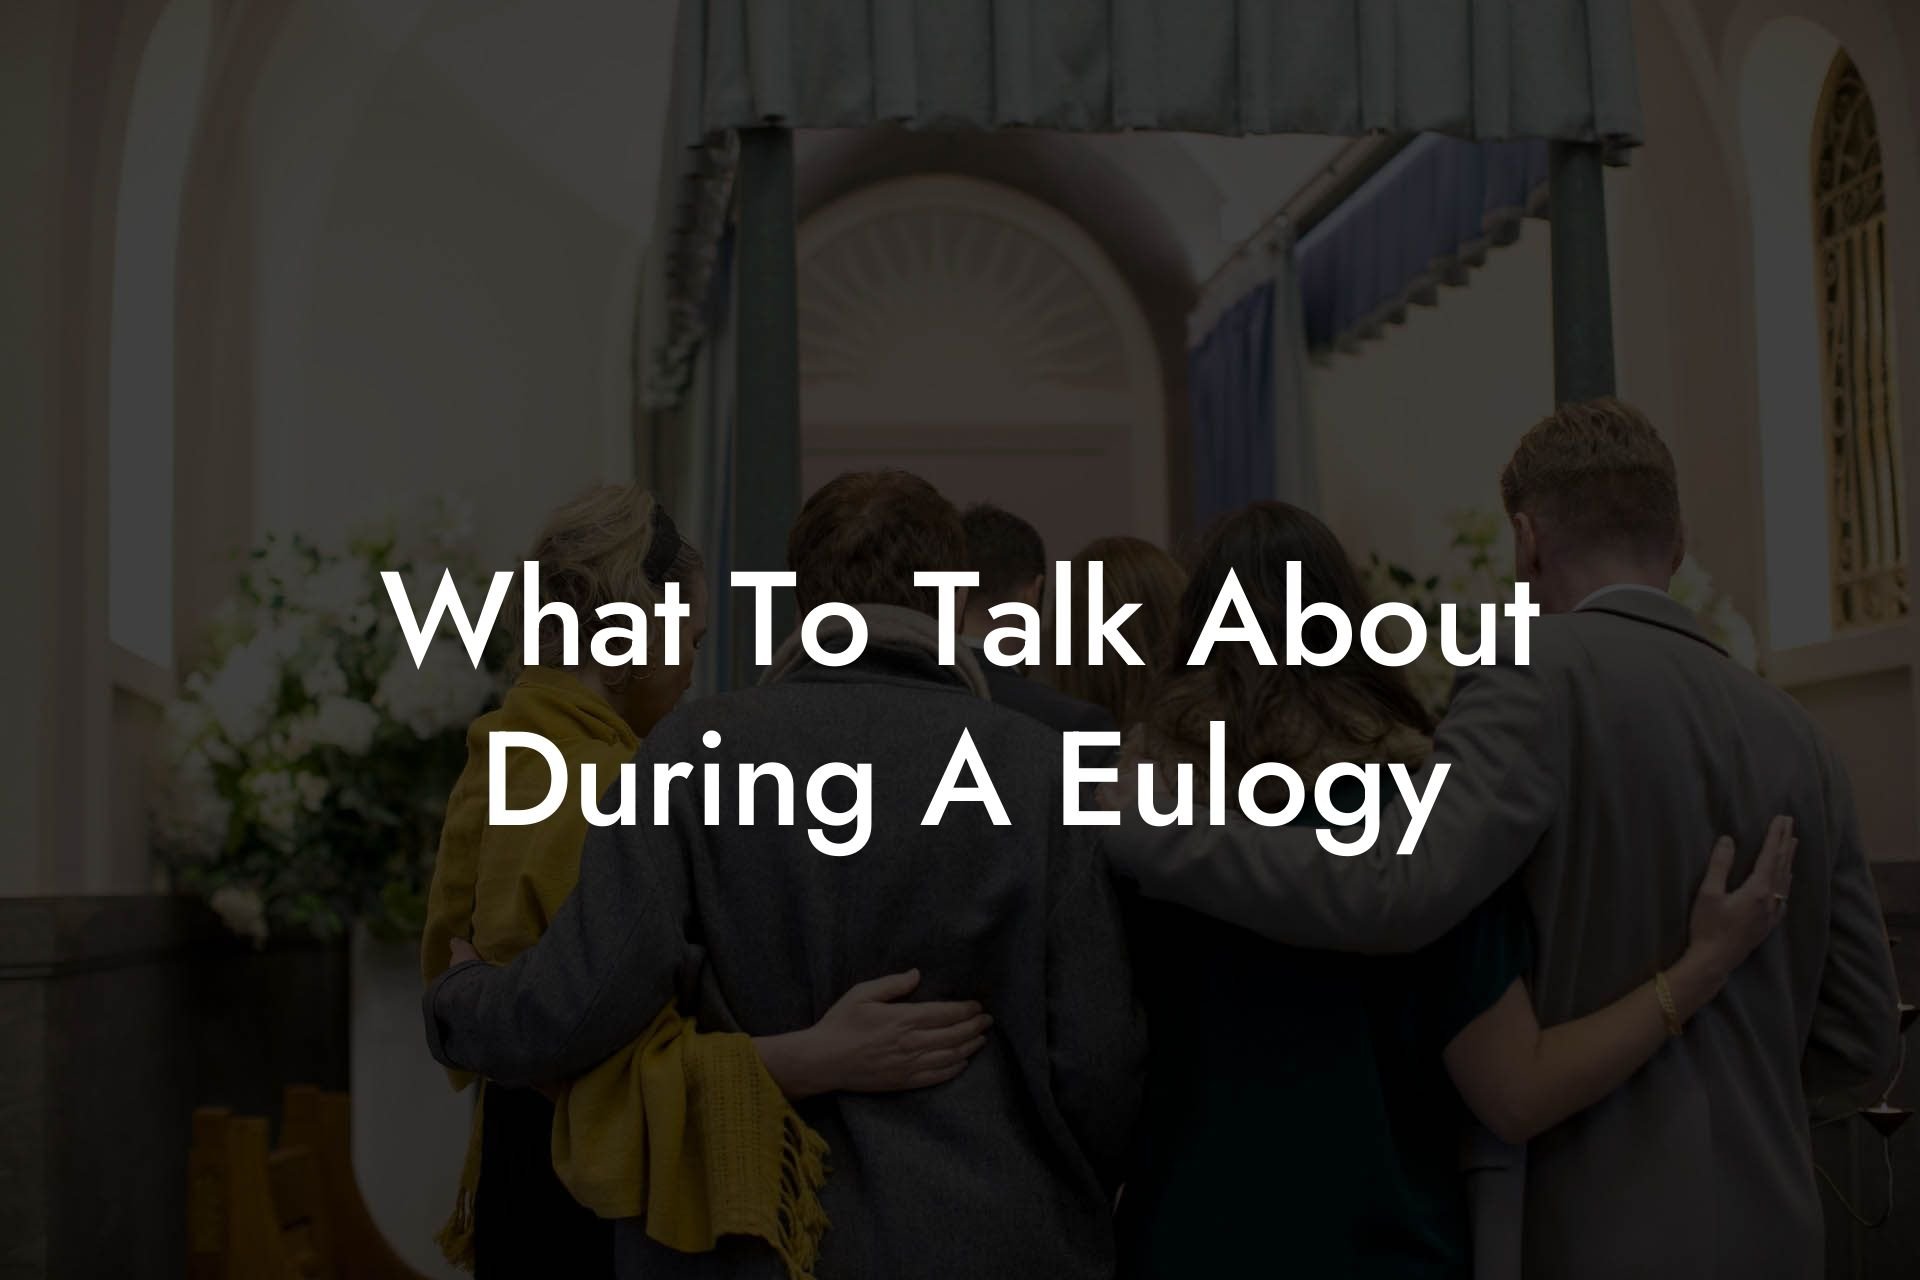 What To Talk About During A Eulogy